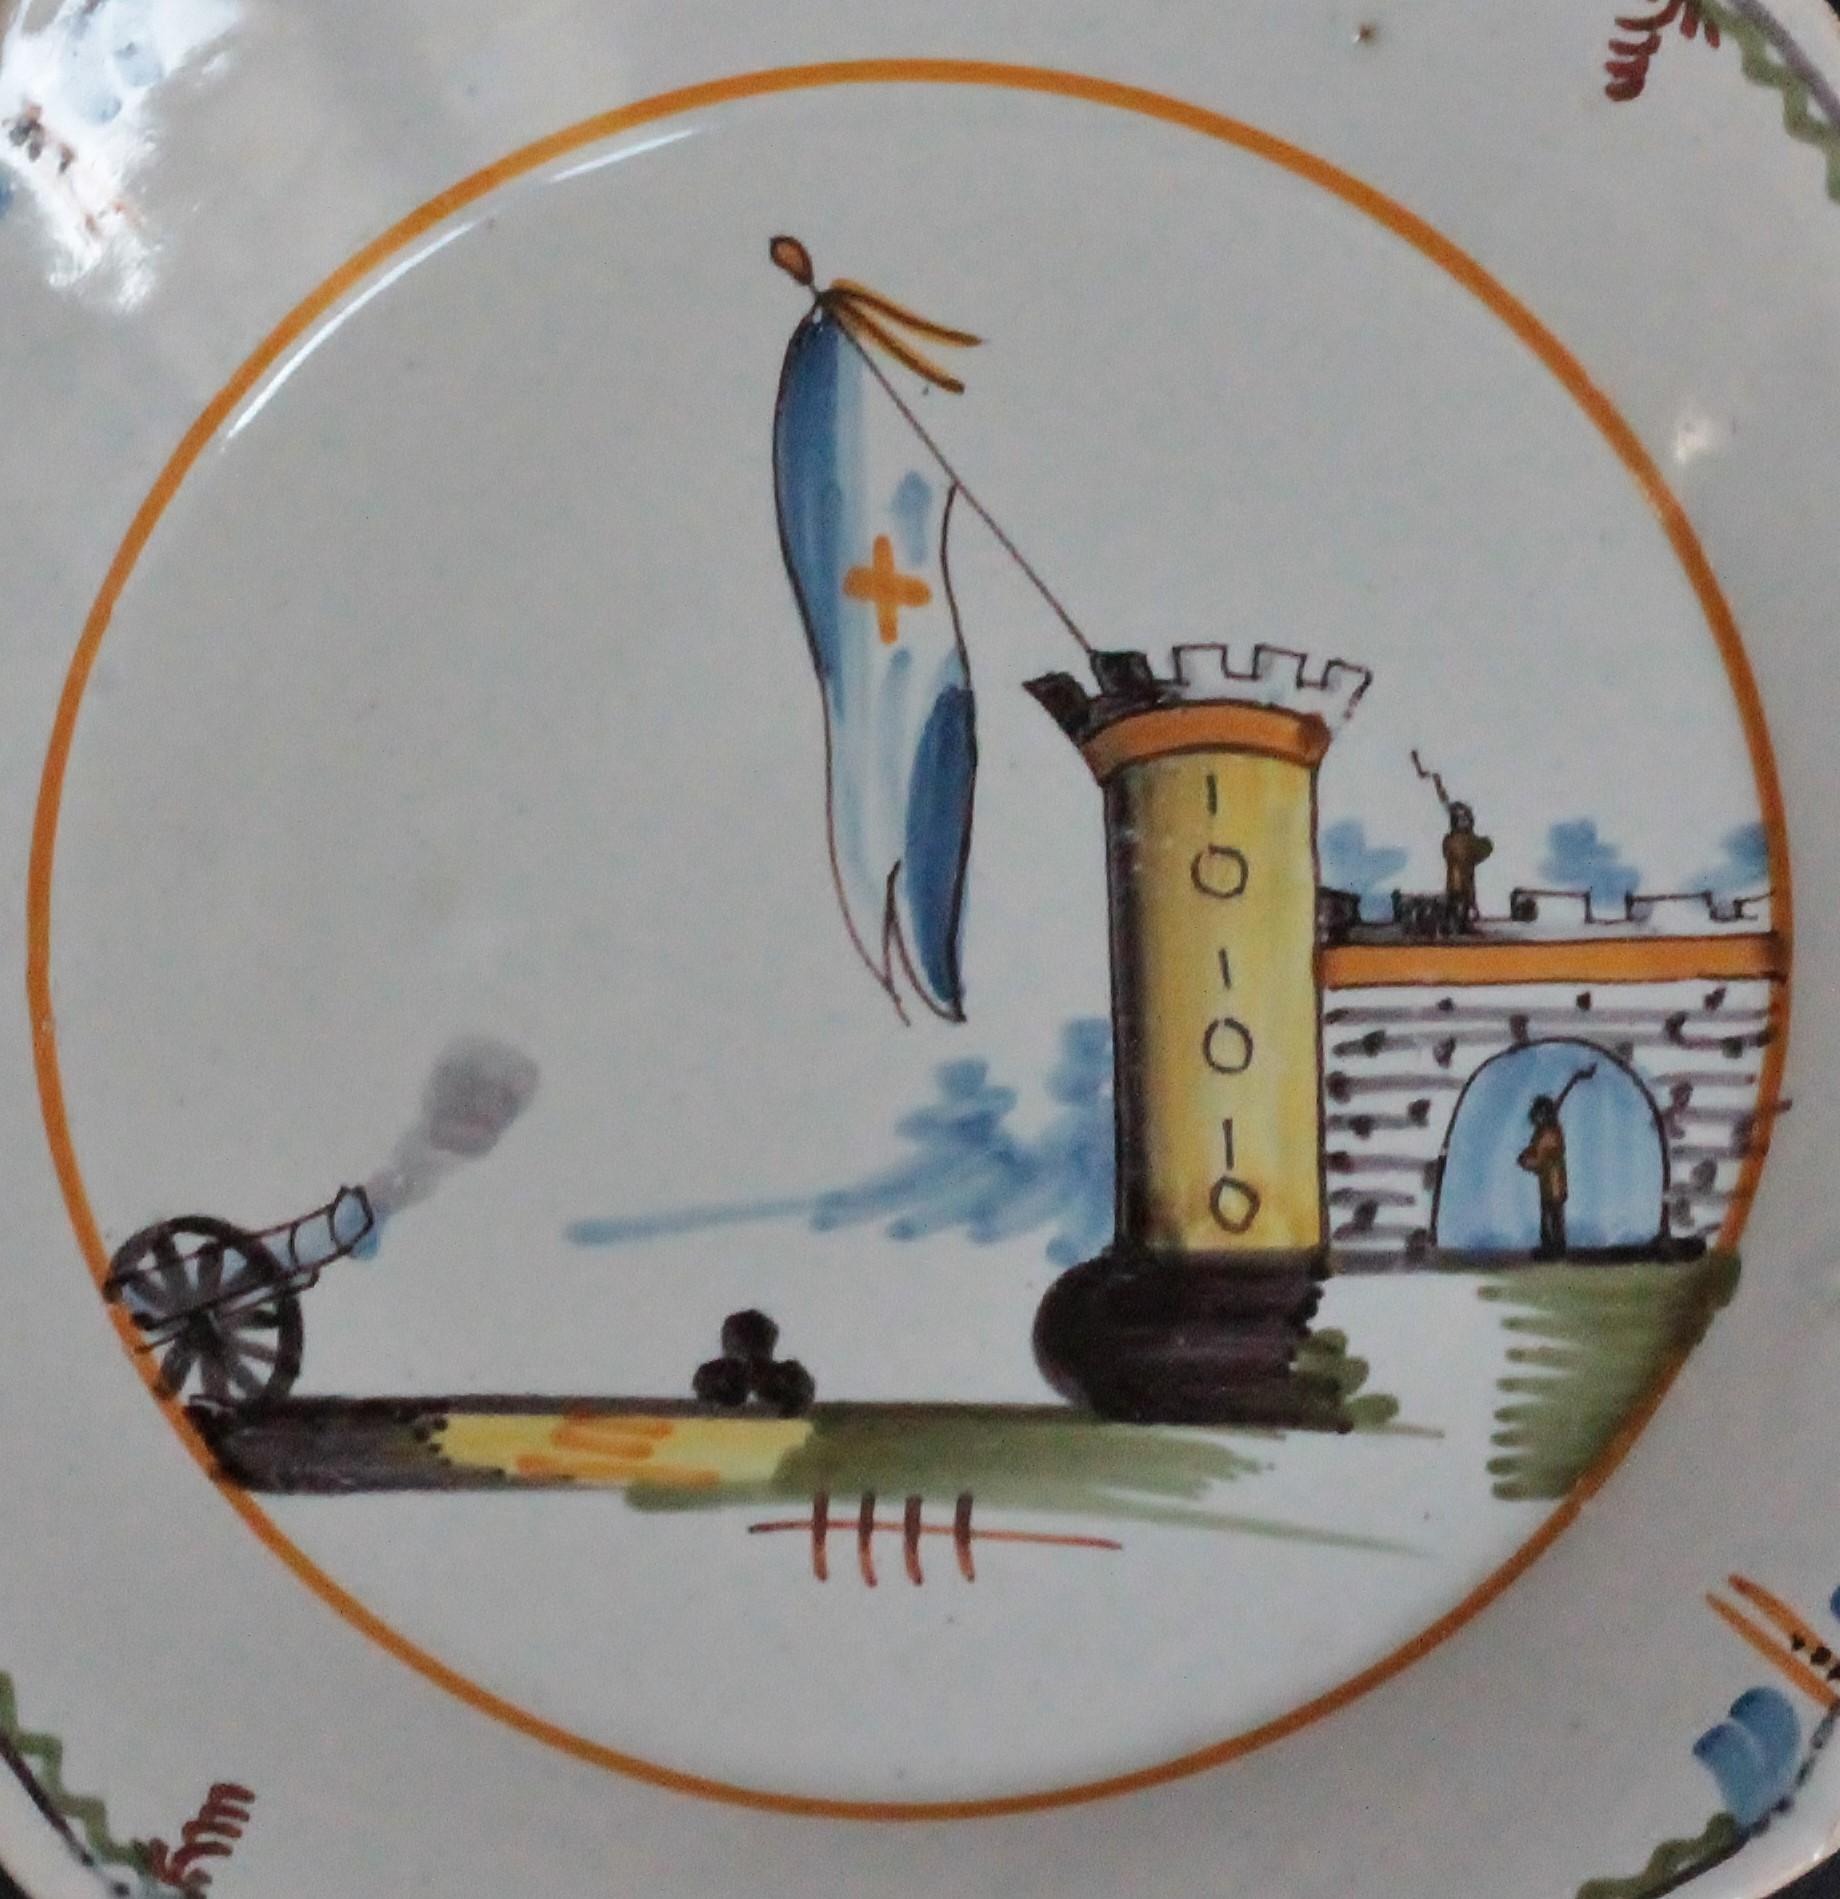 Louis XVI Nevers 'France' Faience Plate of Revolutionary Period, 18th Century For Sale